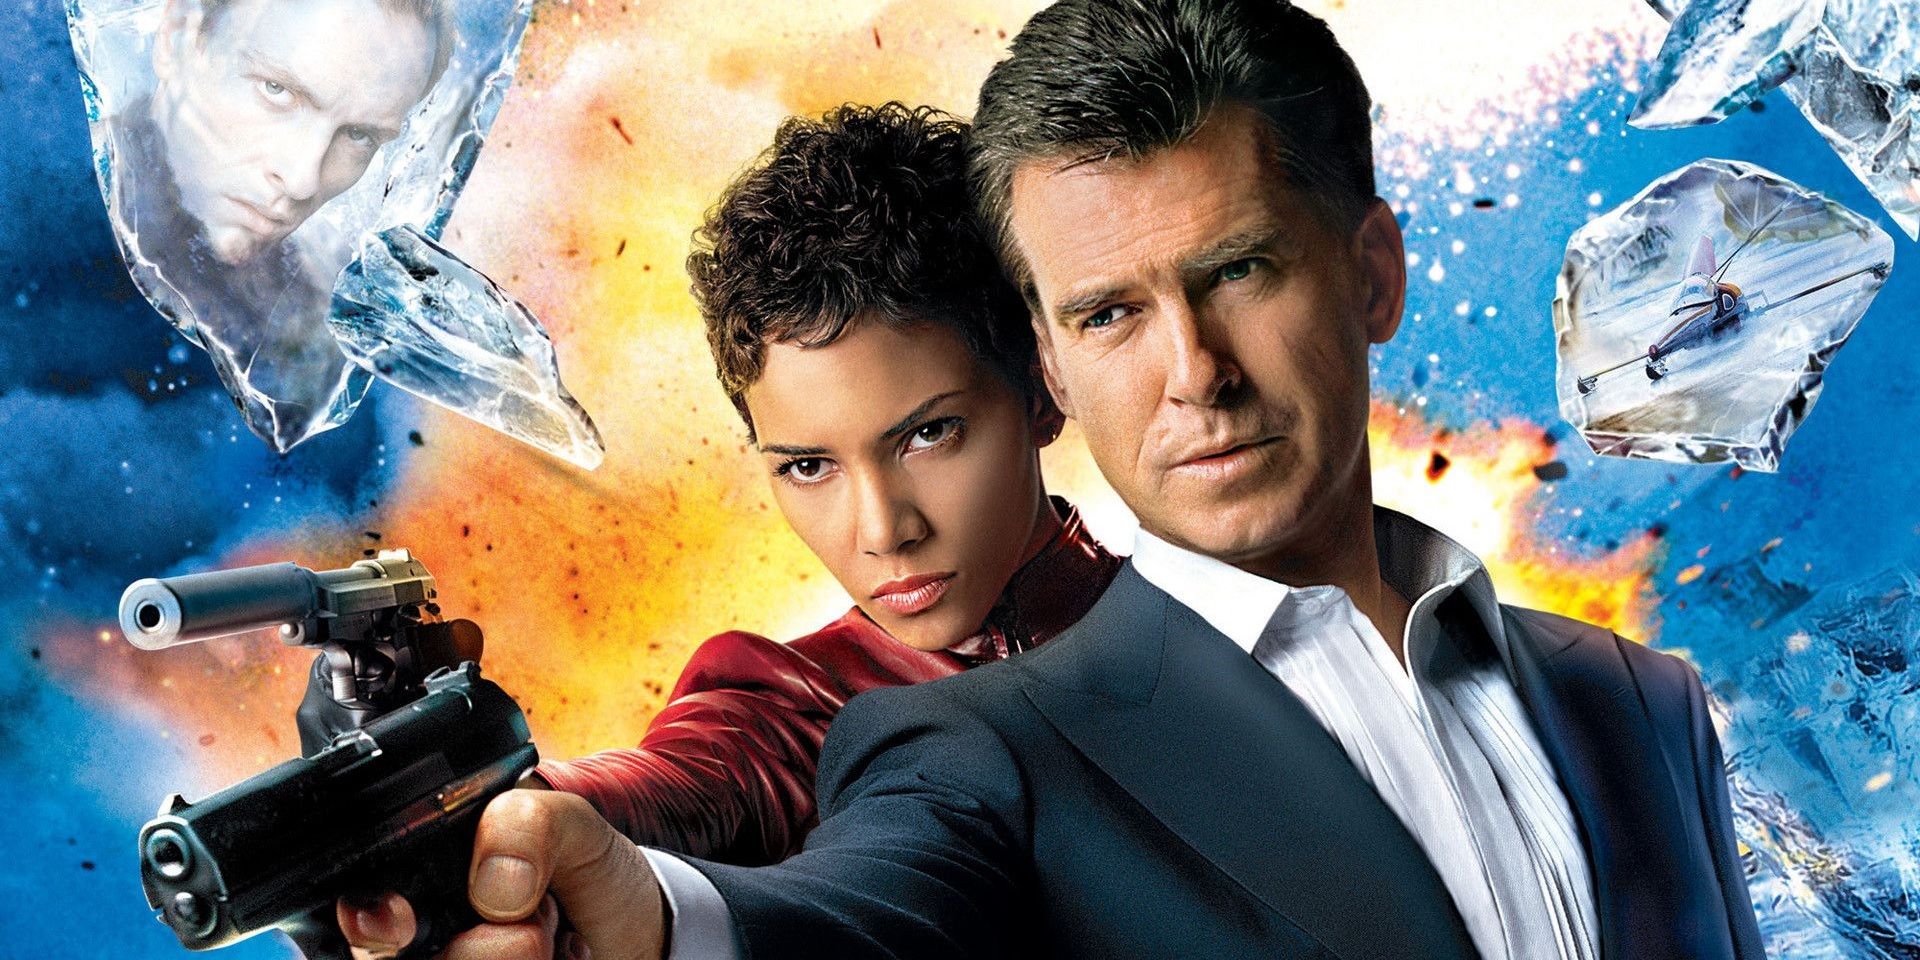 Pierce Brosnan and Halle Berry on the poster for Die Another Day